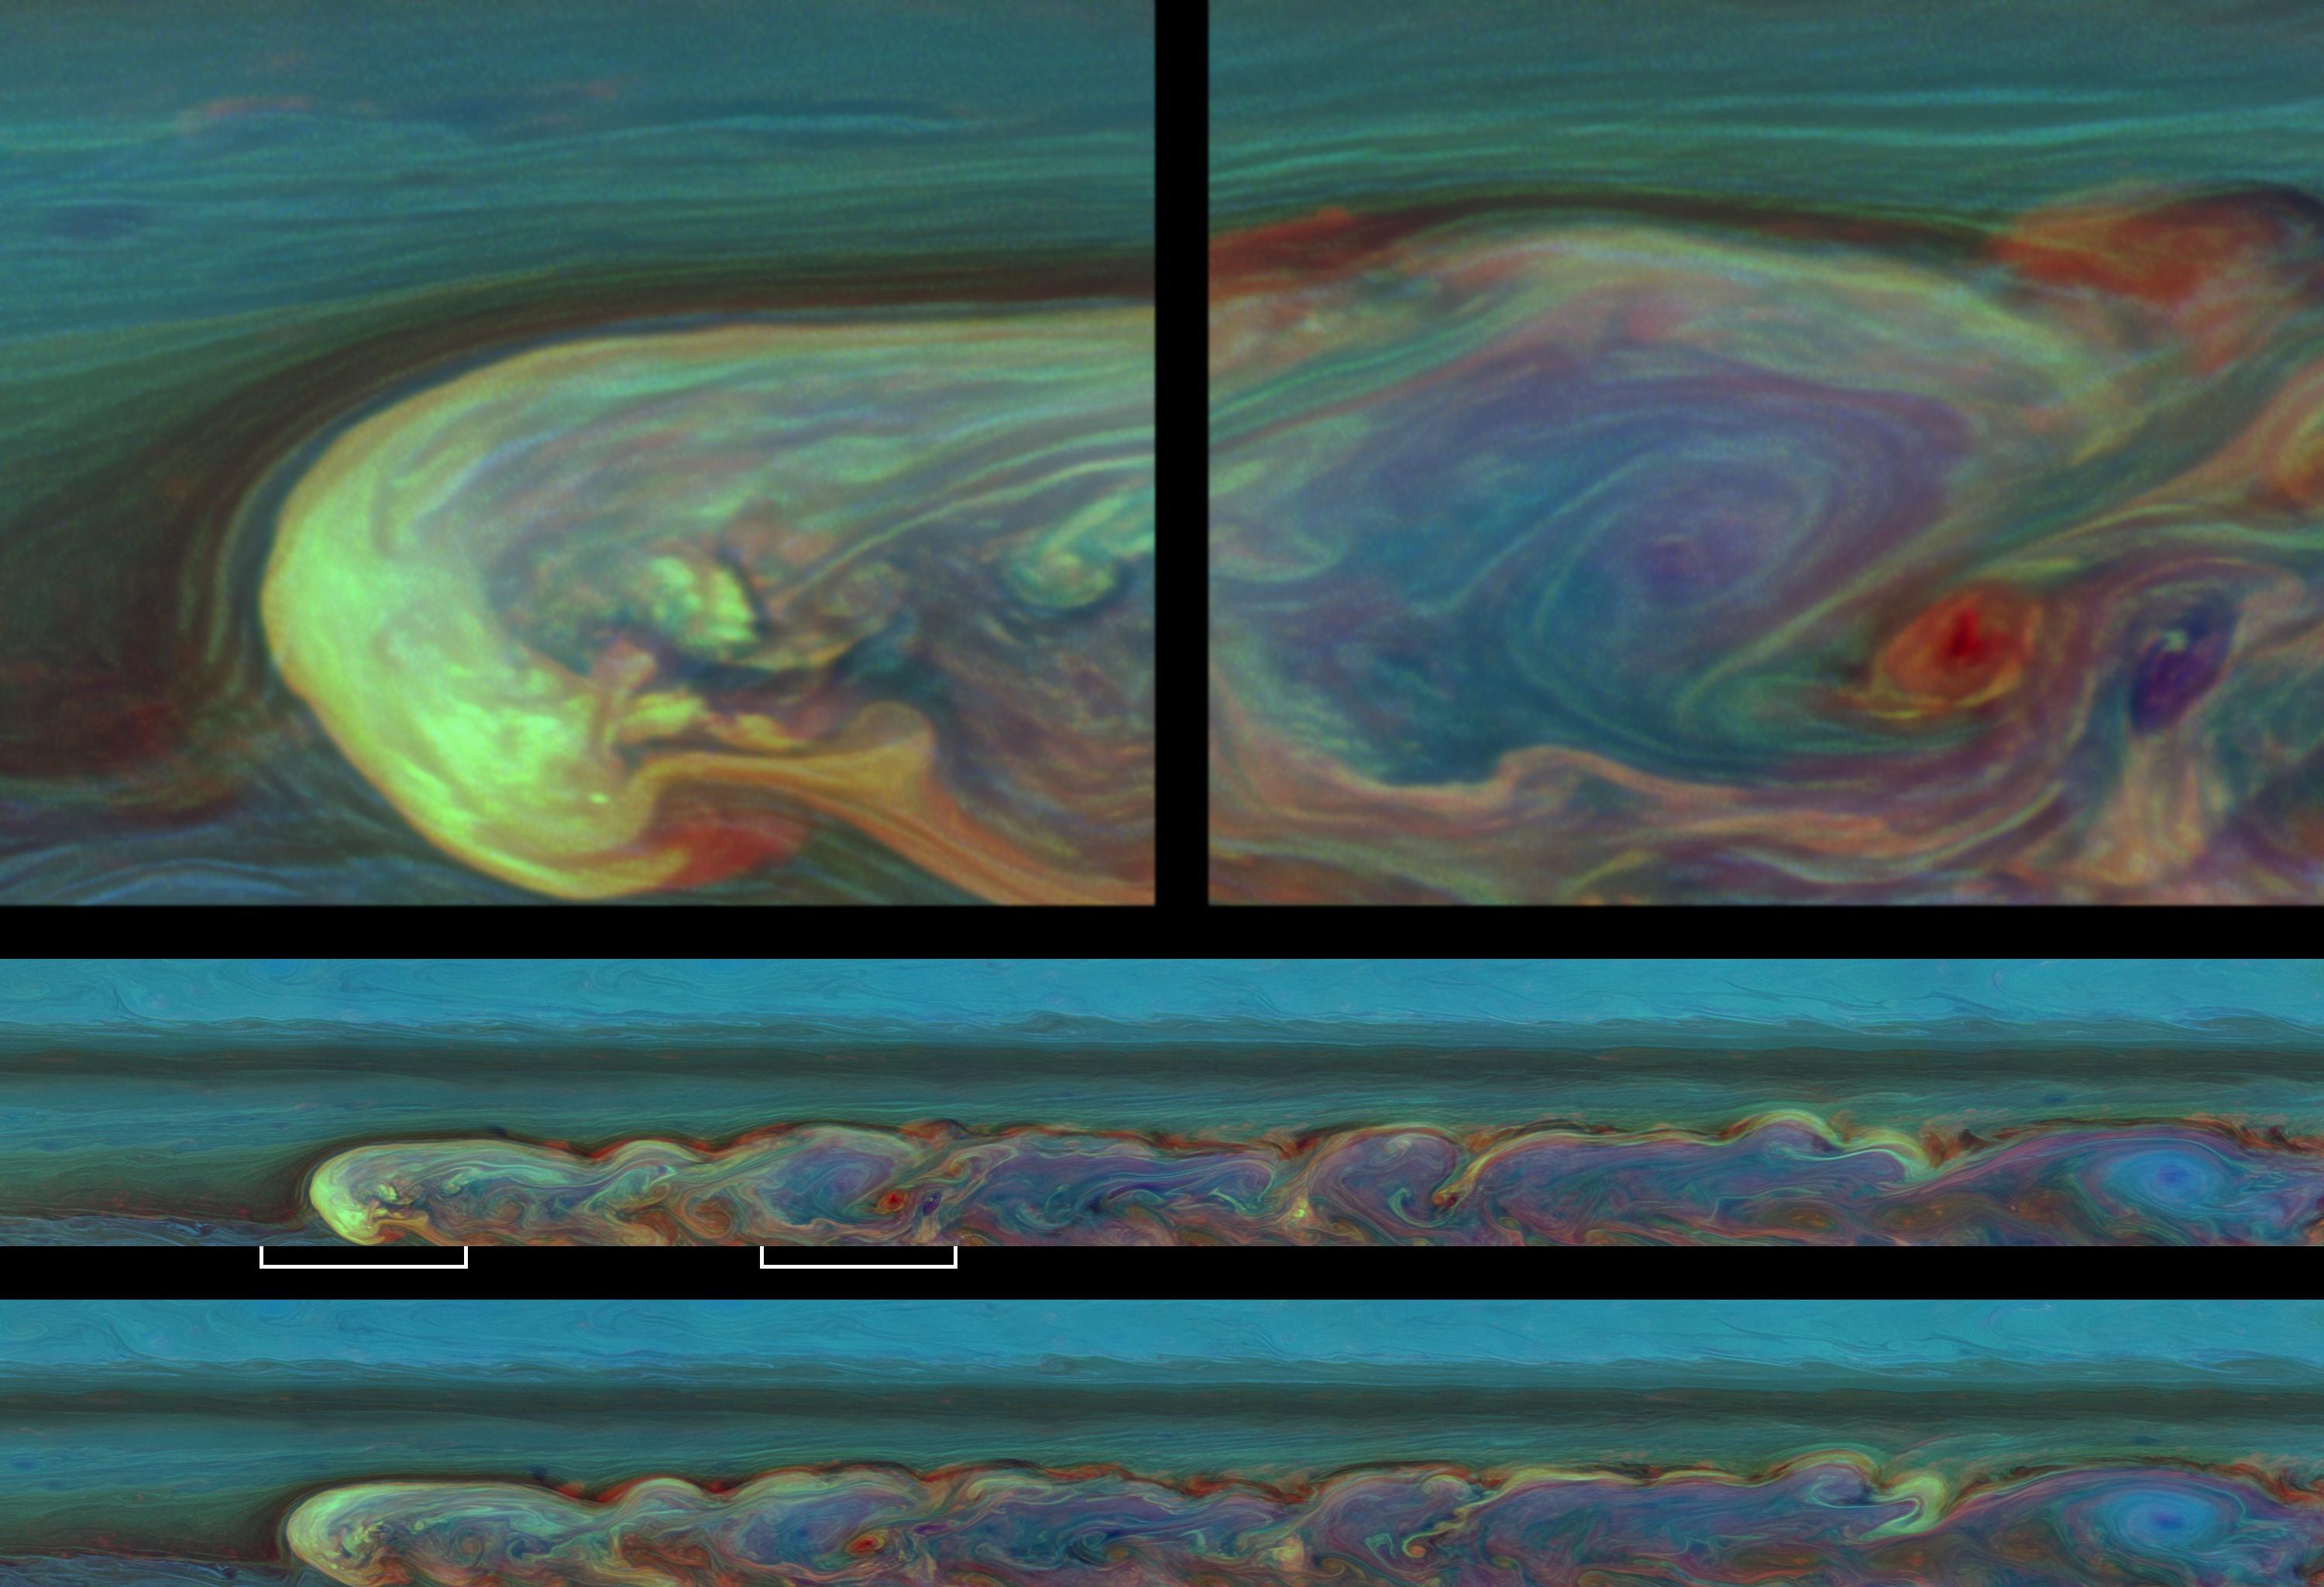 False-color images chronicle a day in the life of a huge storm on Saturn